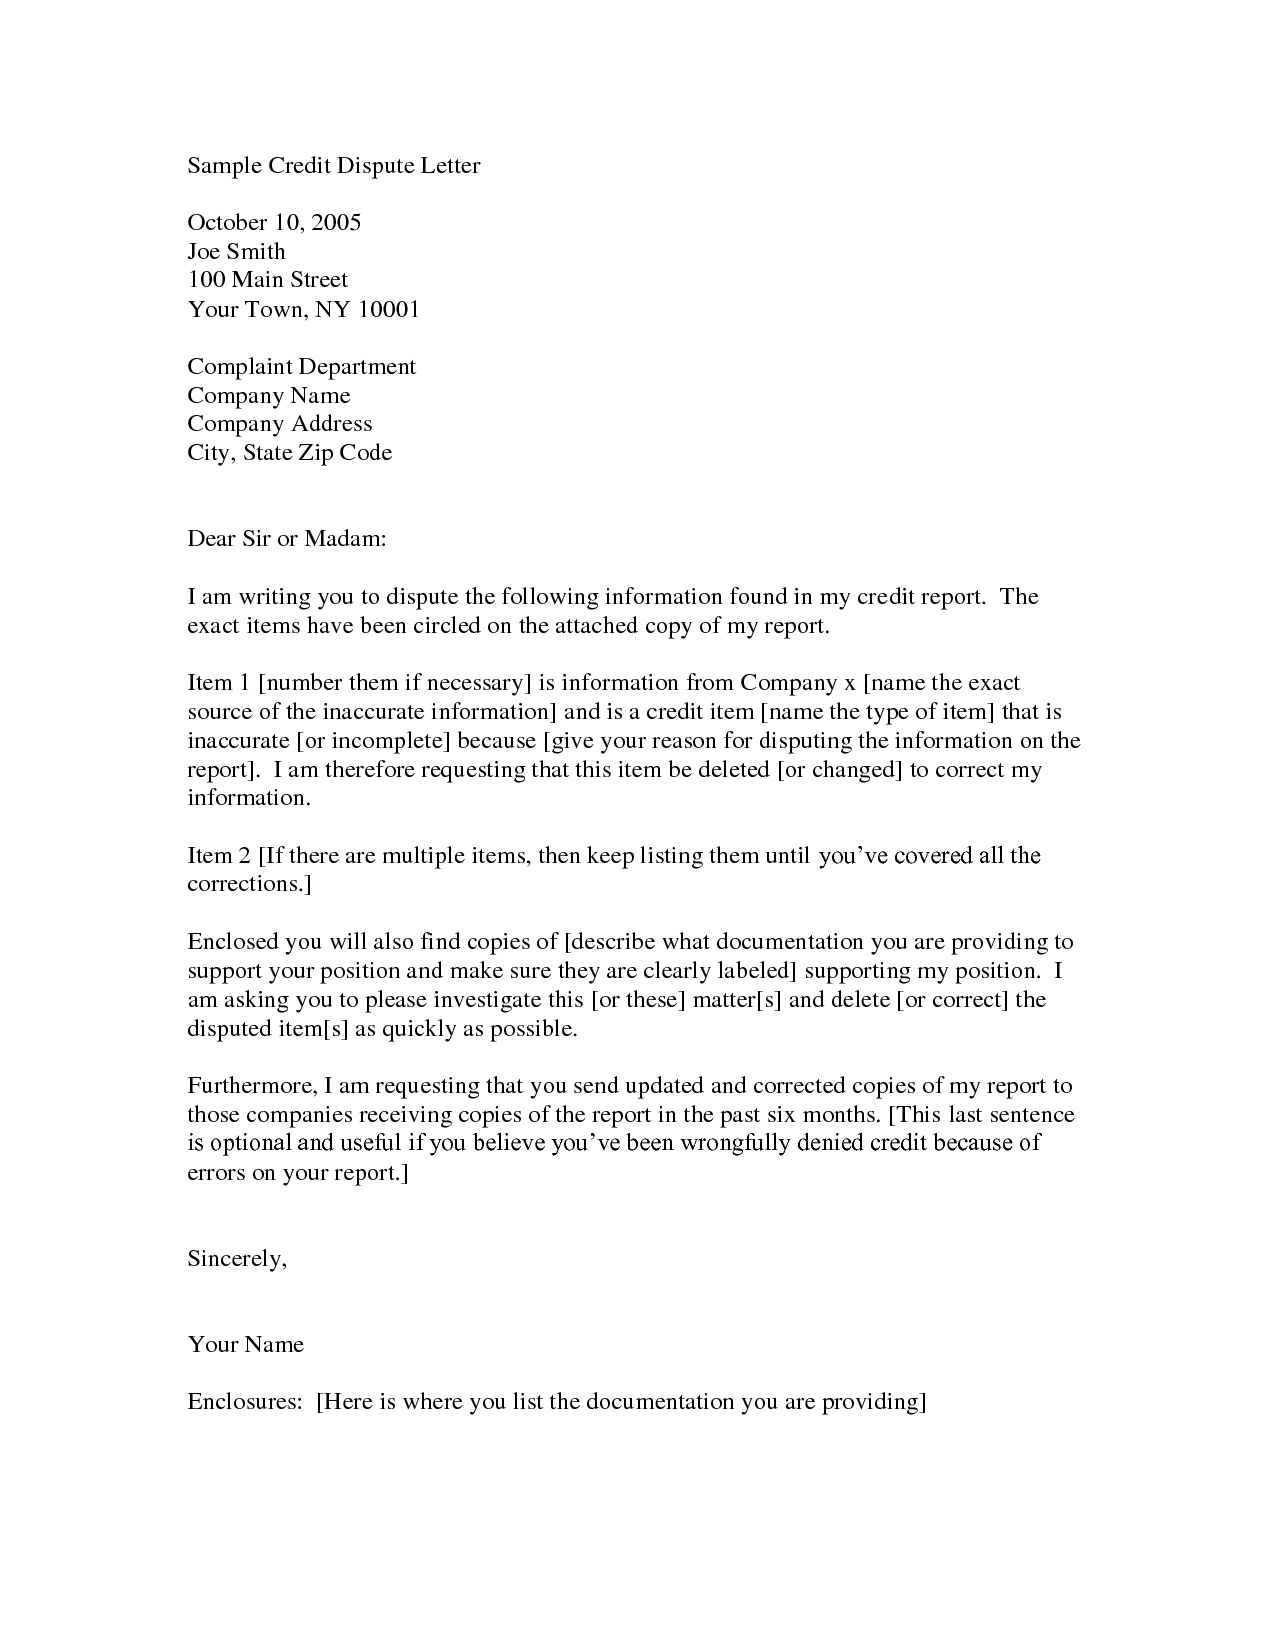 Credit Inquiry Removal Letter Template - Credit Dispute Letter Templates Acurnamedia